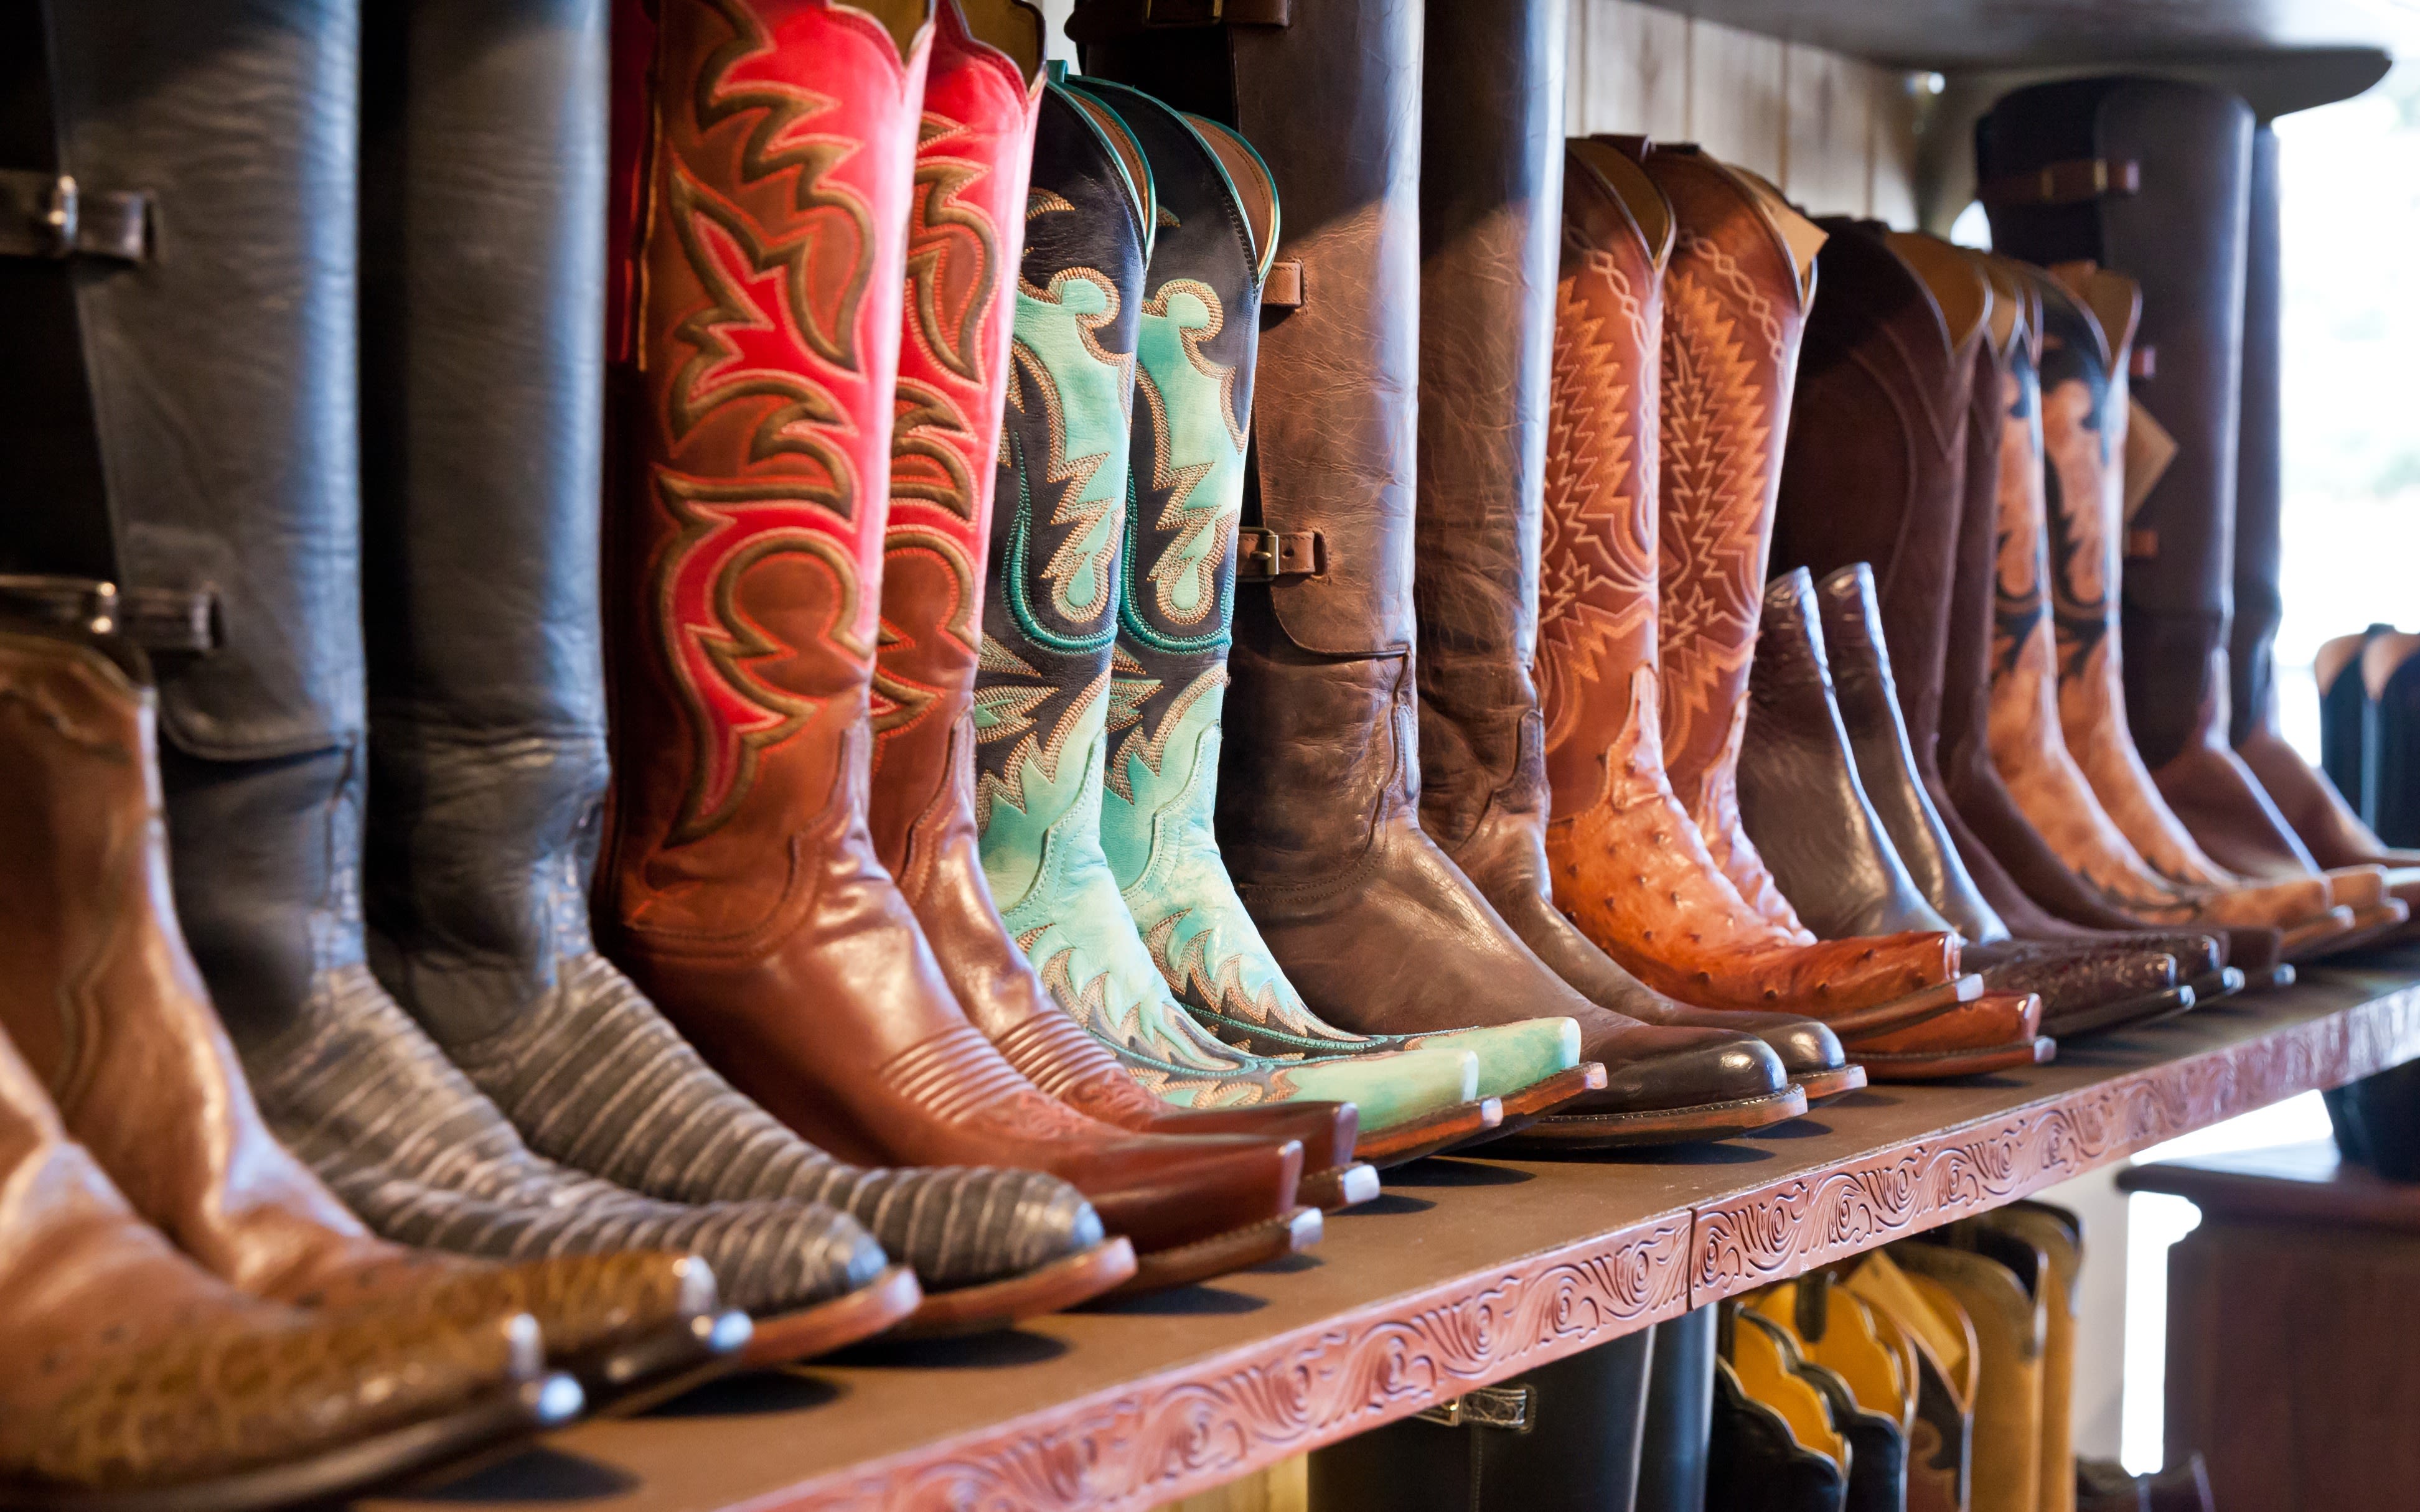 An image of cowboy boots on a shelf